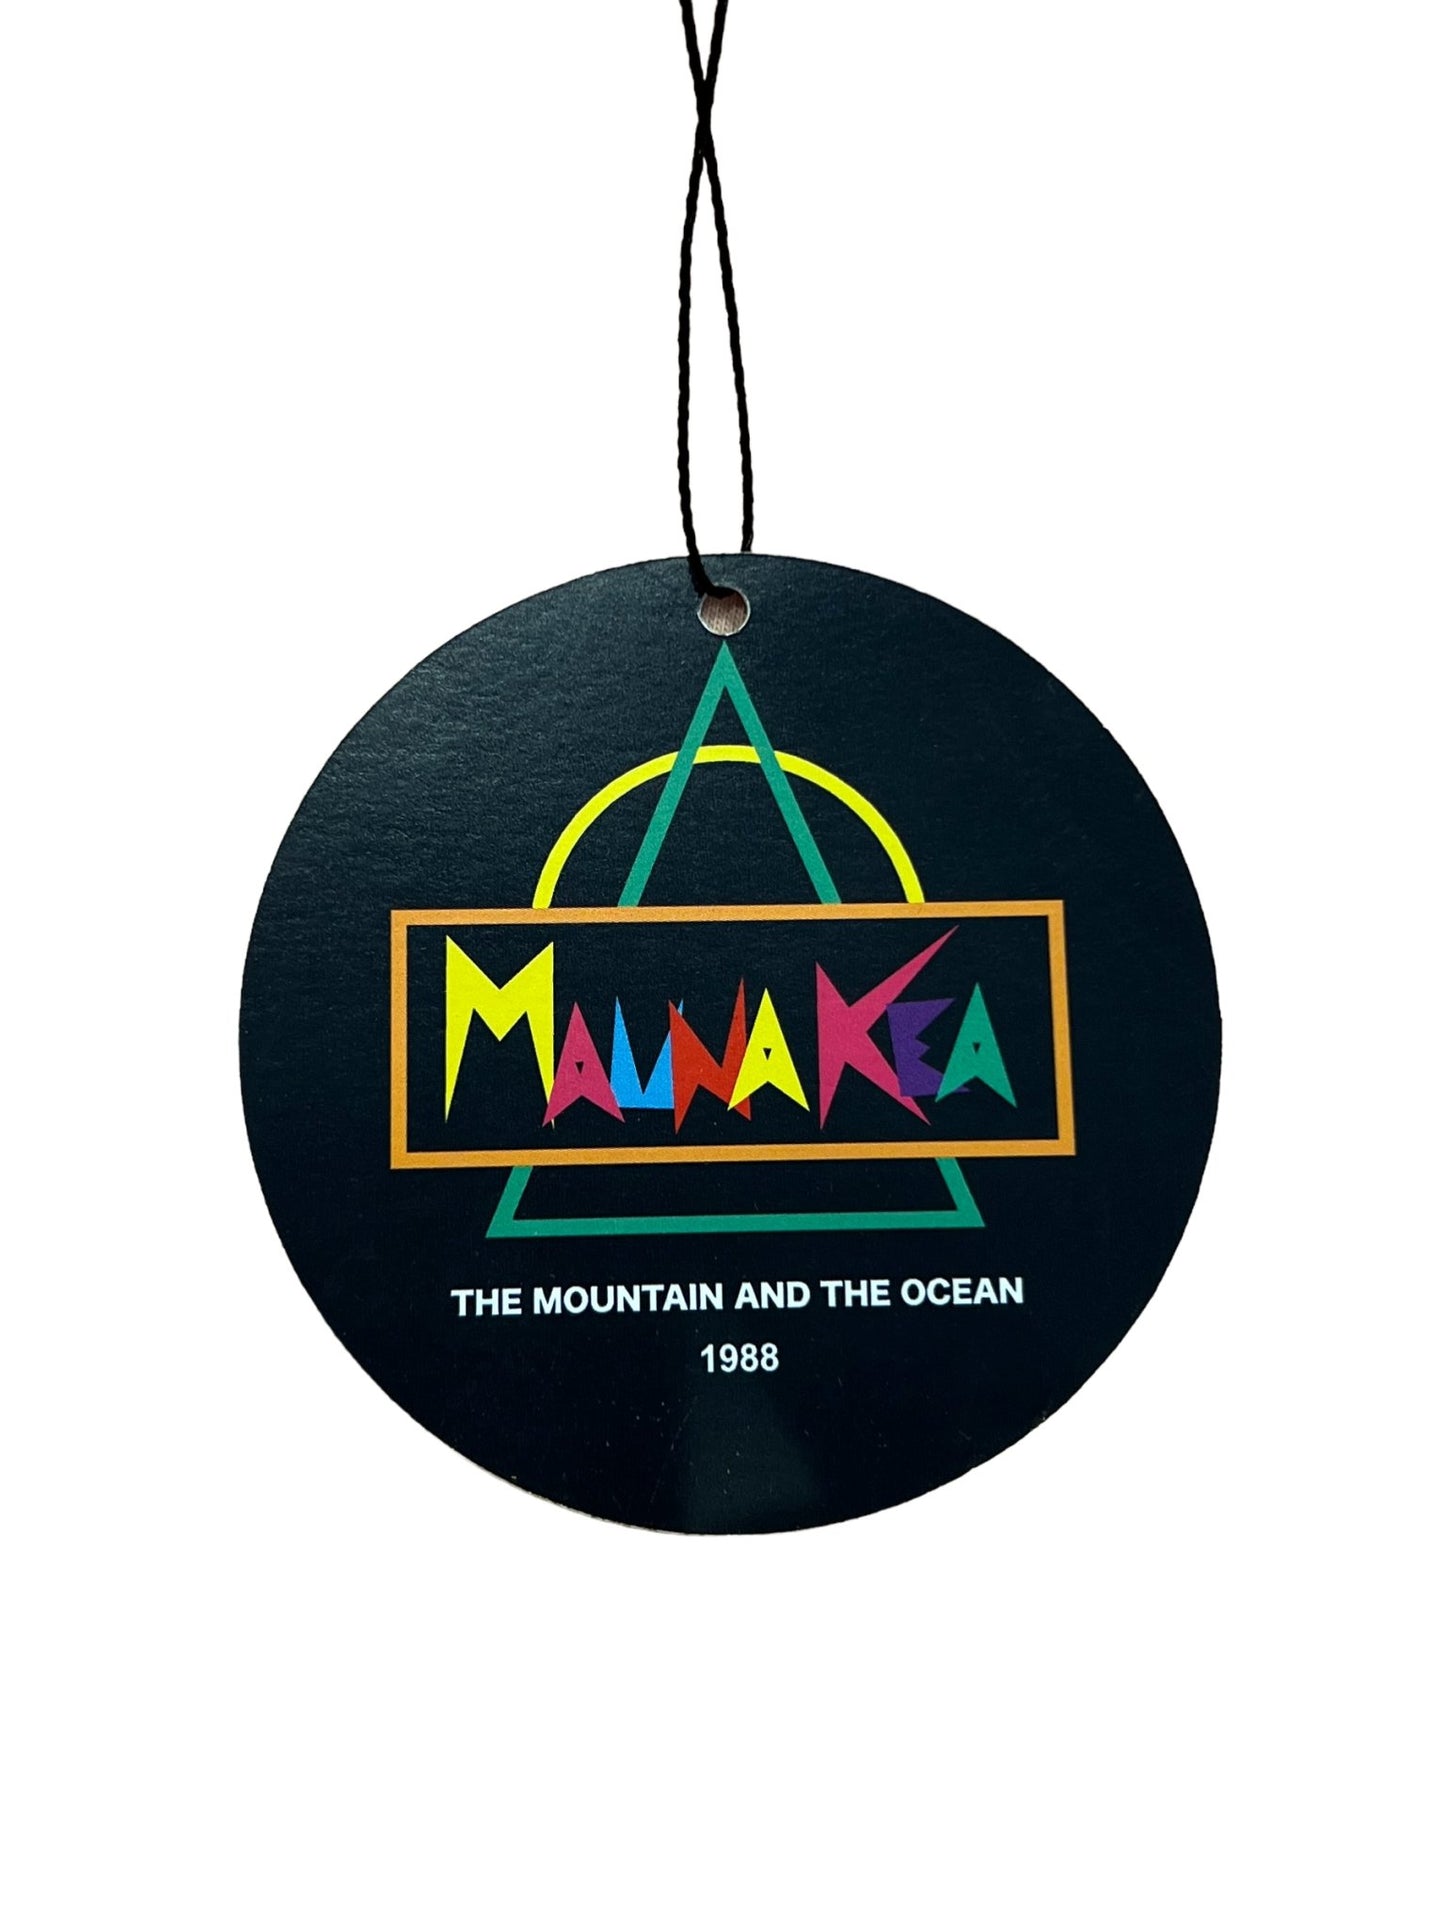 Round black MAUNA-KEA tag with colorful text "Maunakea" and "the mountain and the ocean 1988," featuring a stylized mountain and ocean graphic.